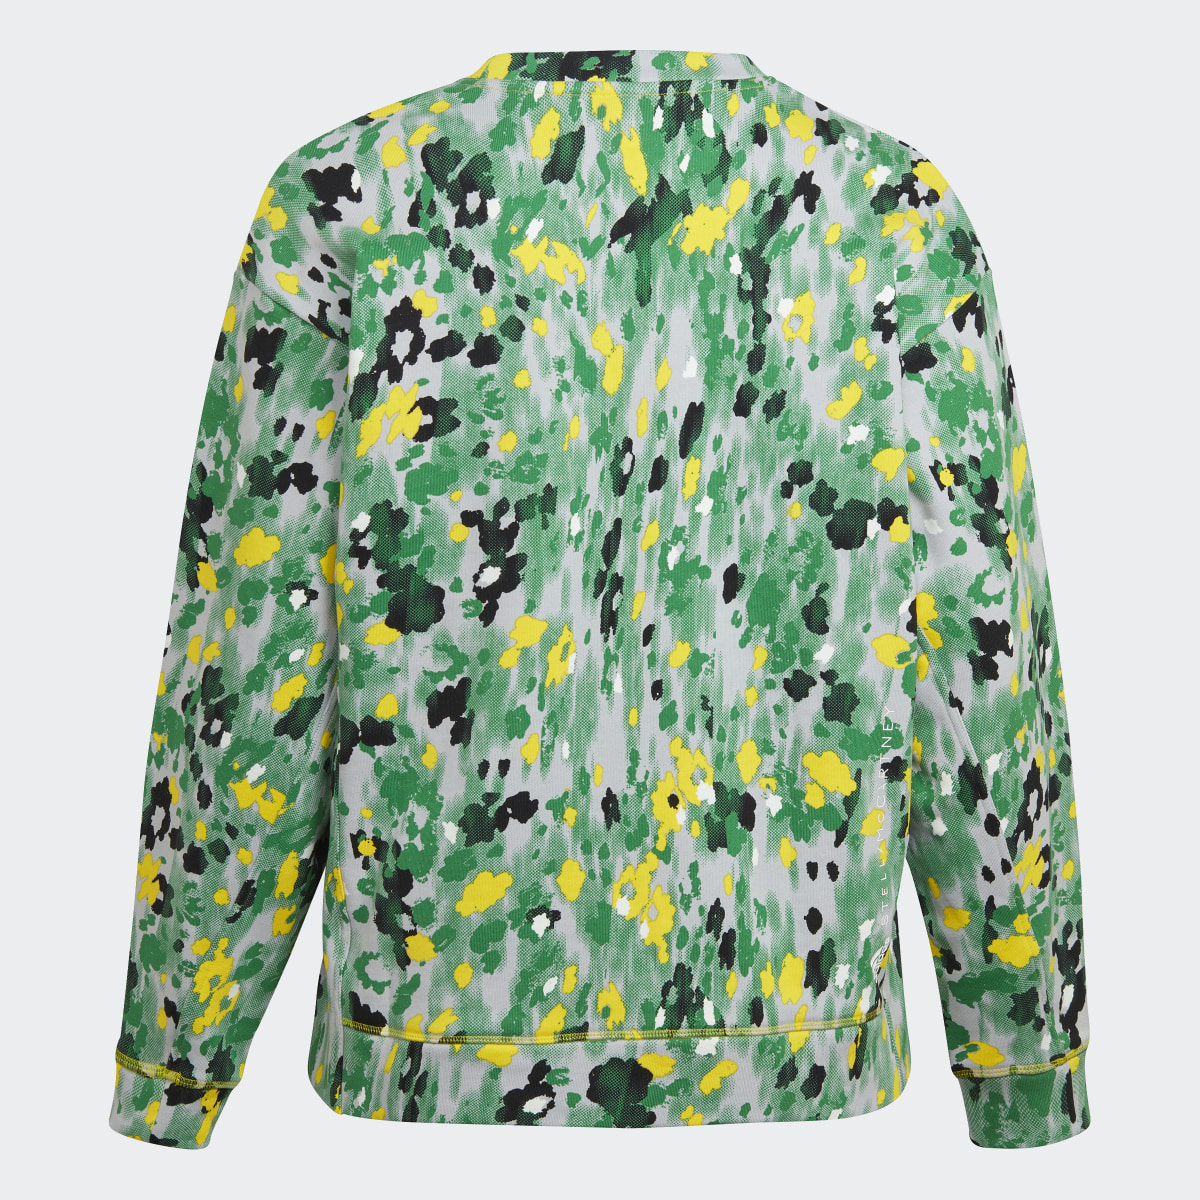 Adidas Sweat-shirt graphique adidas by Stella McCartney (Grandes tailles). 7